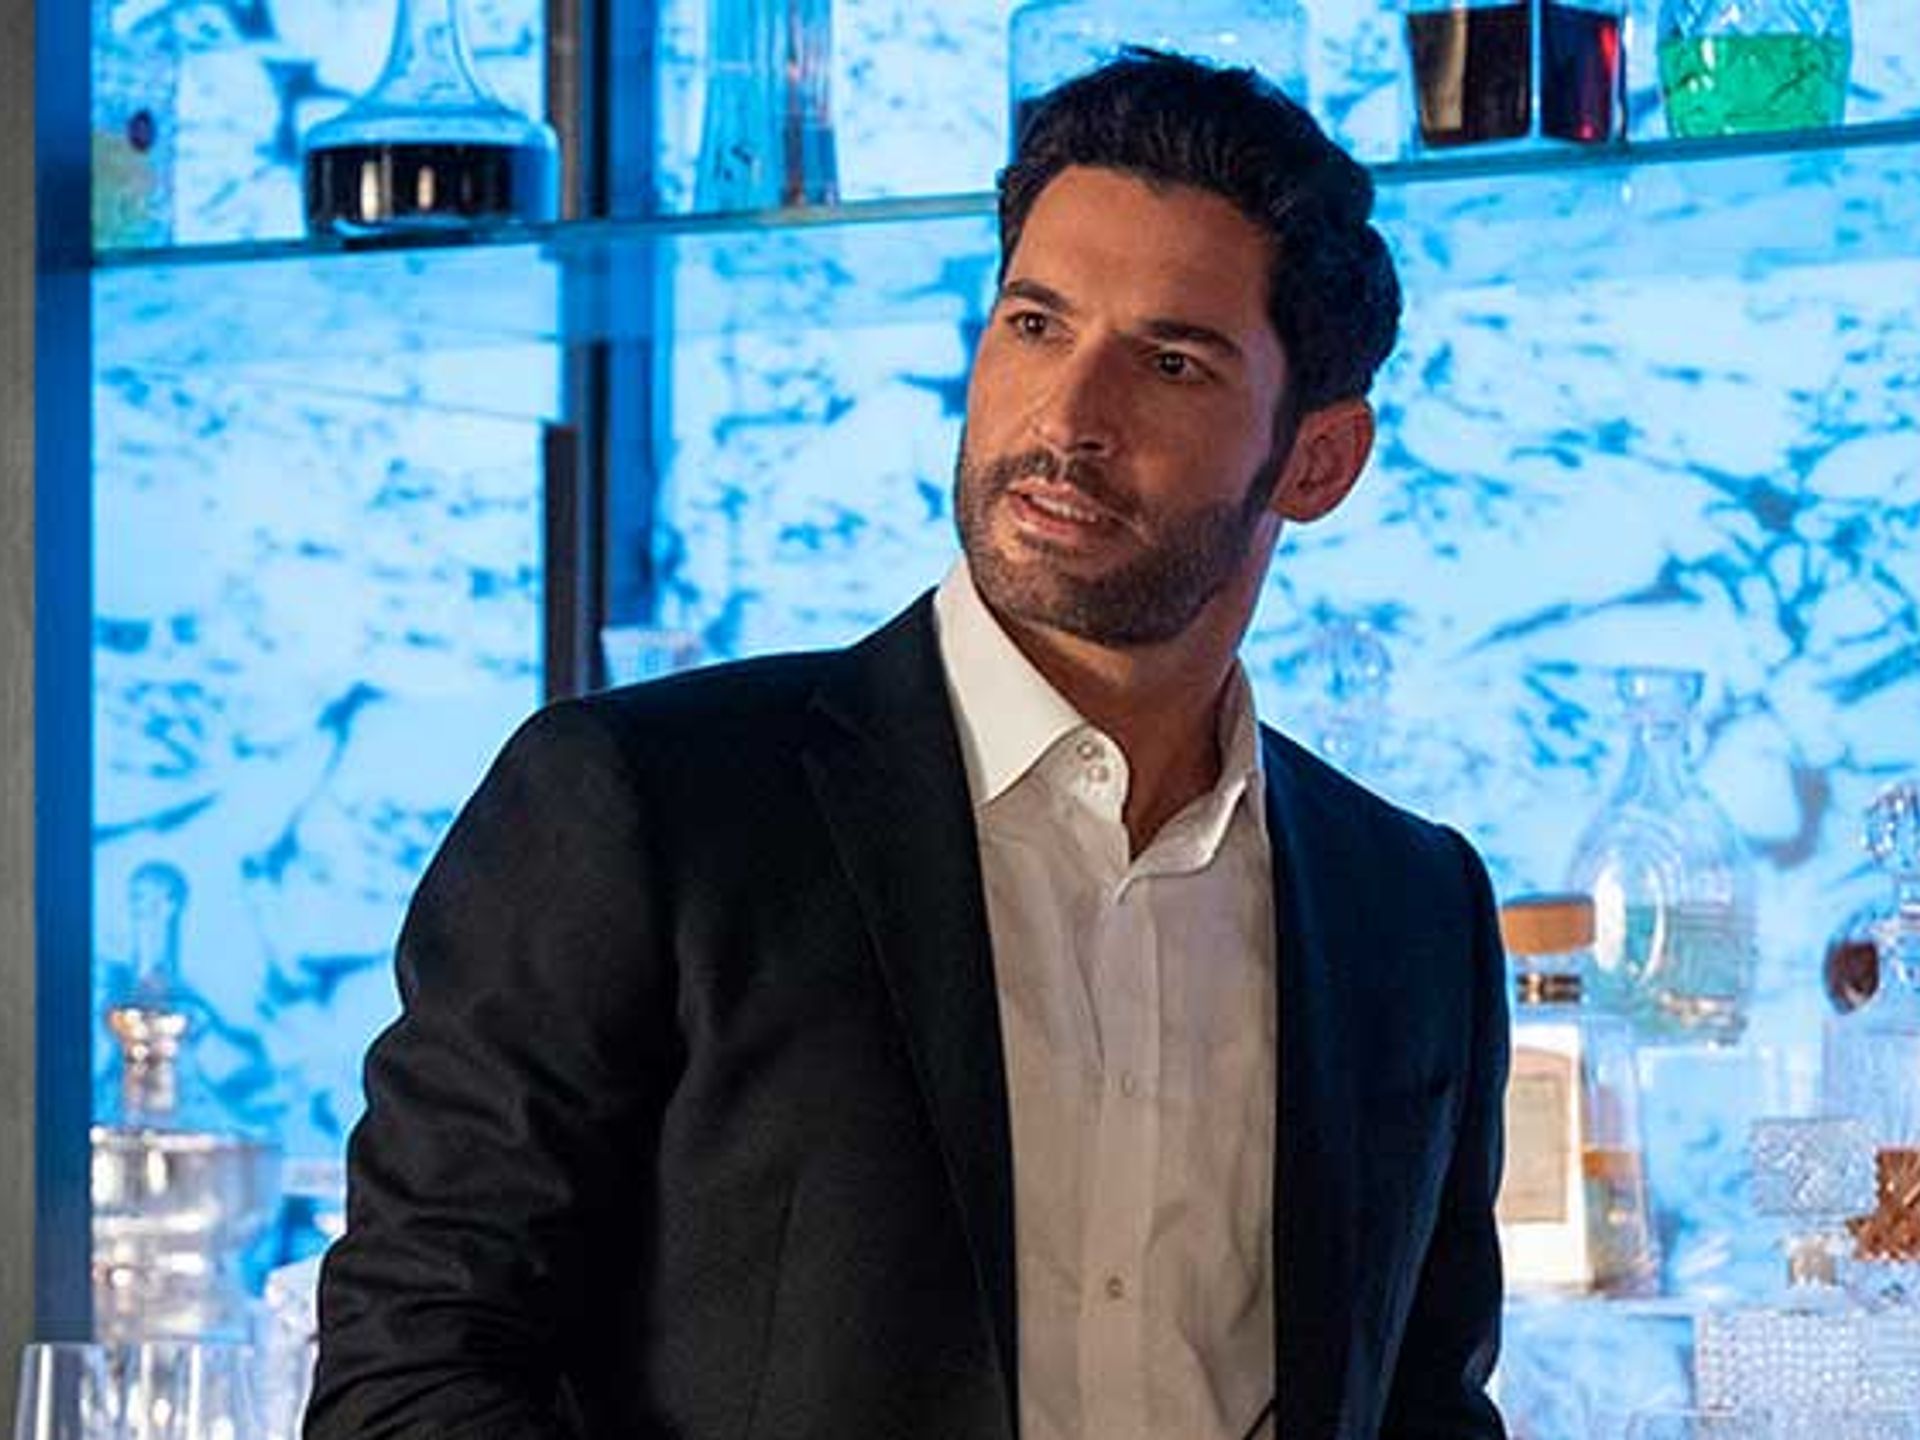 Emma Roberts and Tom Ellis to Star in 'Second Wife' At Hulu